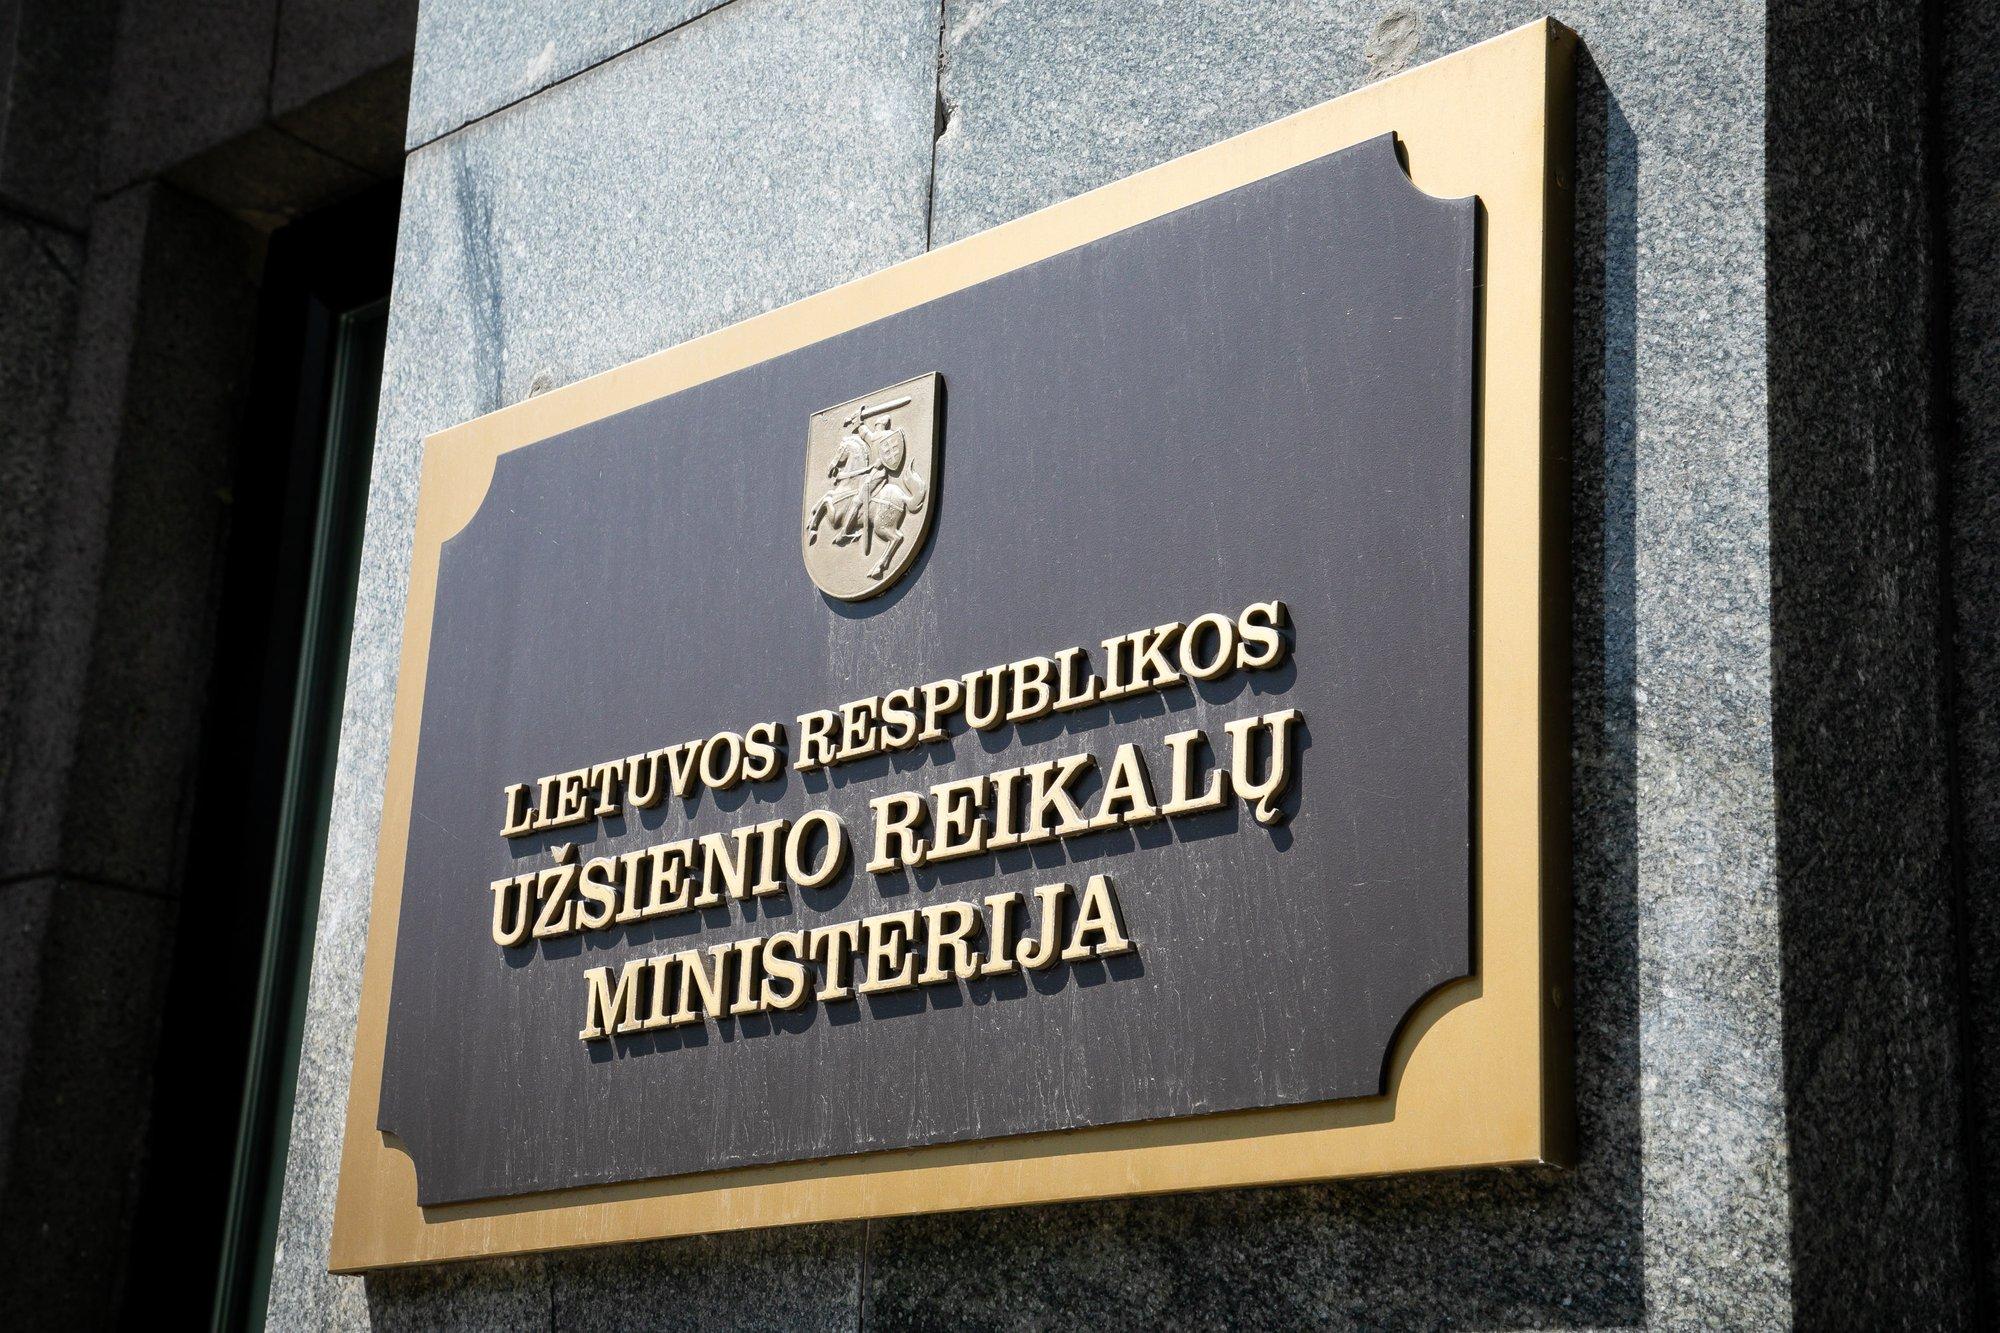 Lithuania expresses strong protest to Belarus over disinformation